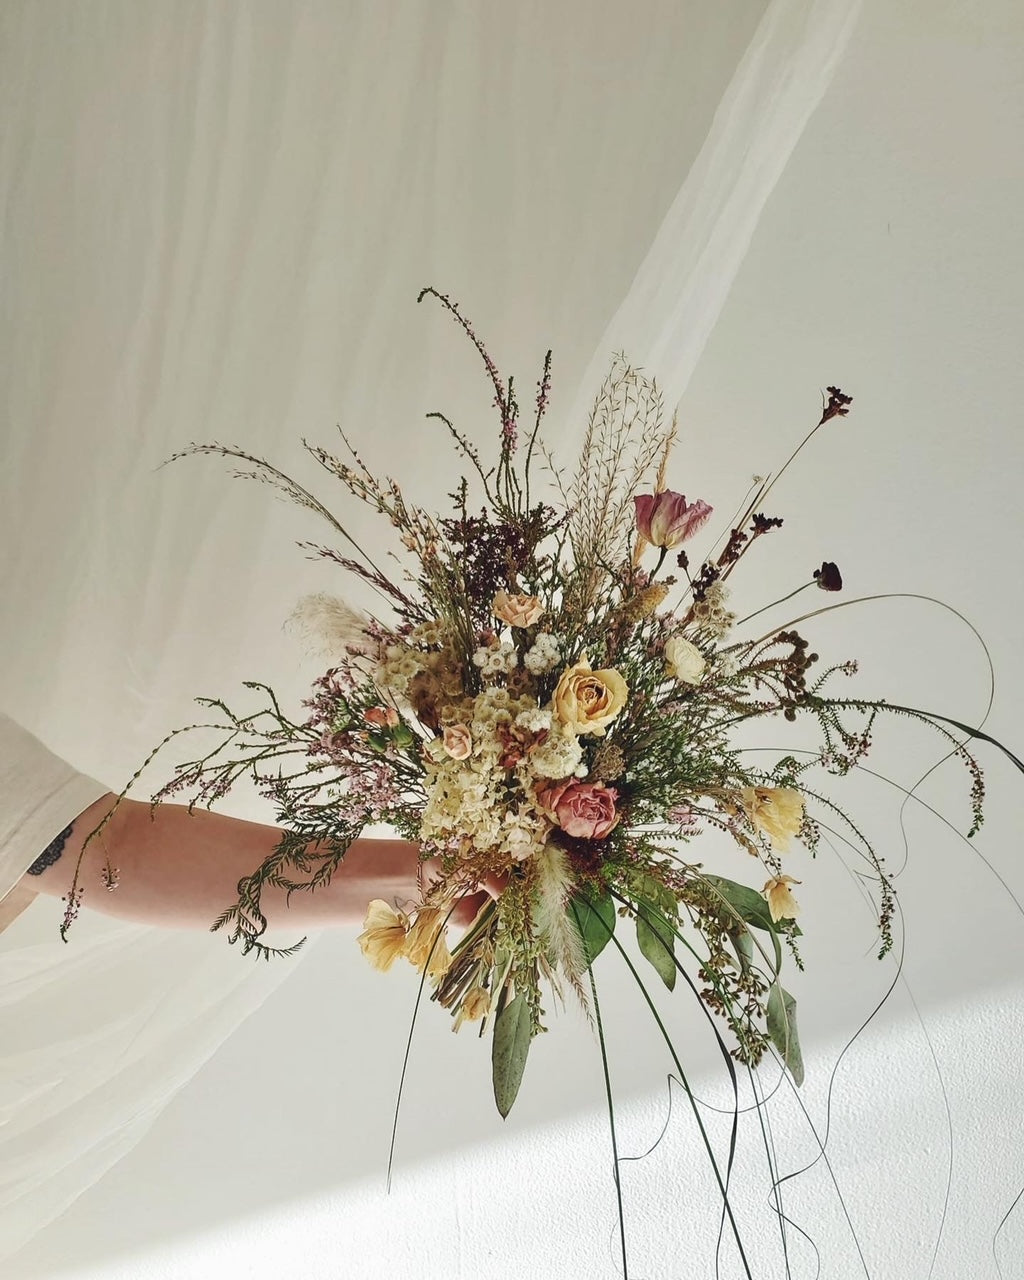 The Dried Bridal Bouquet